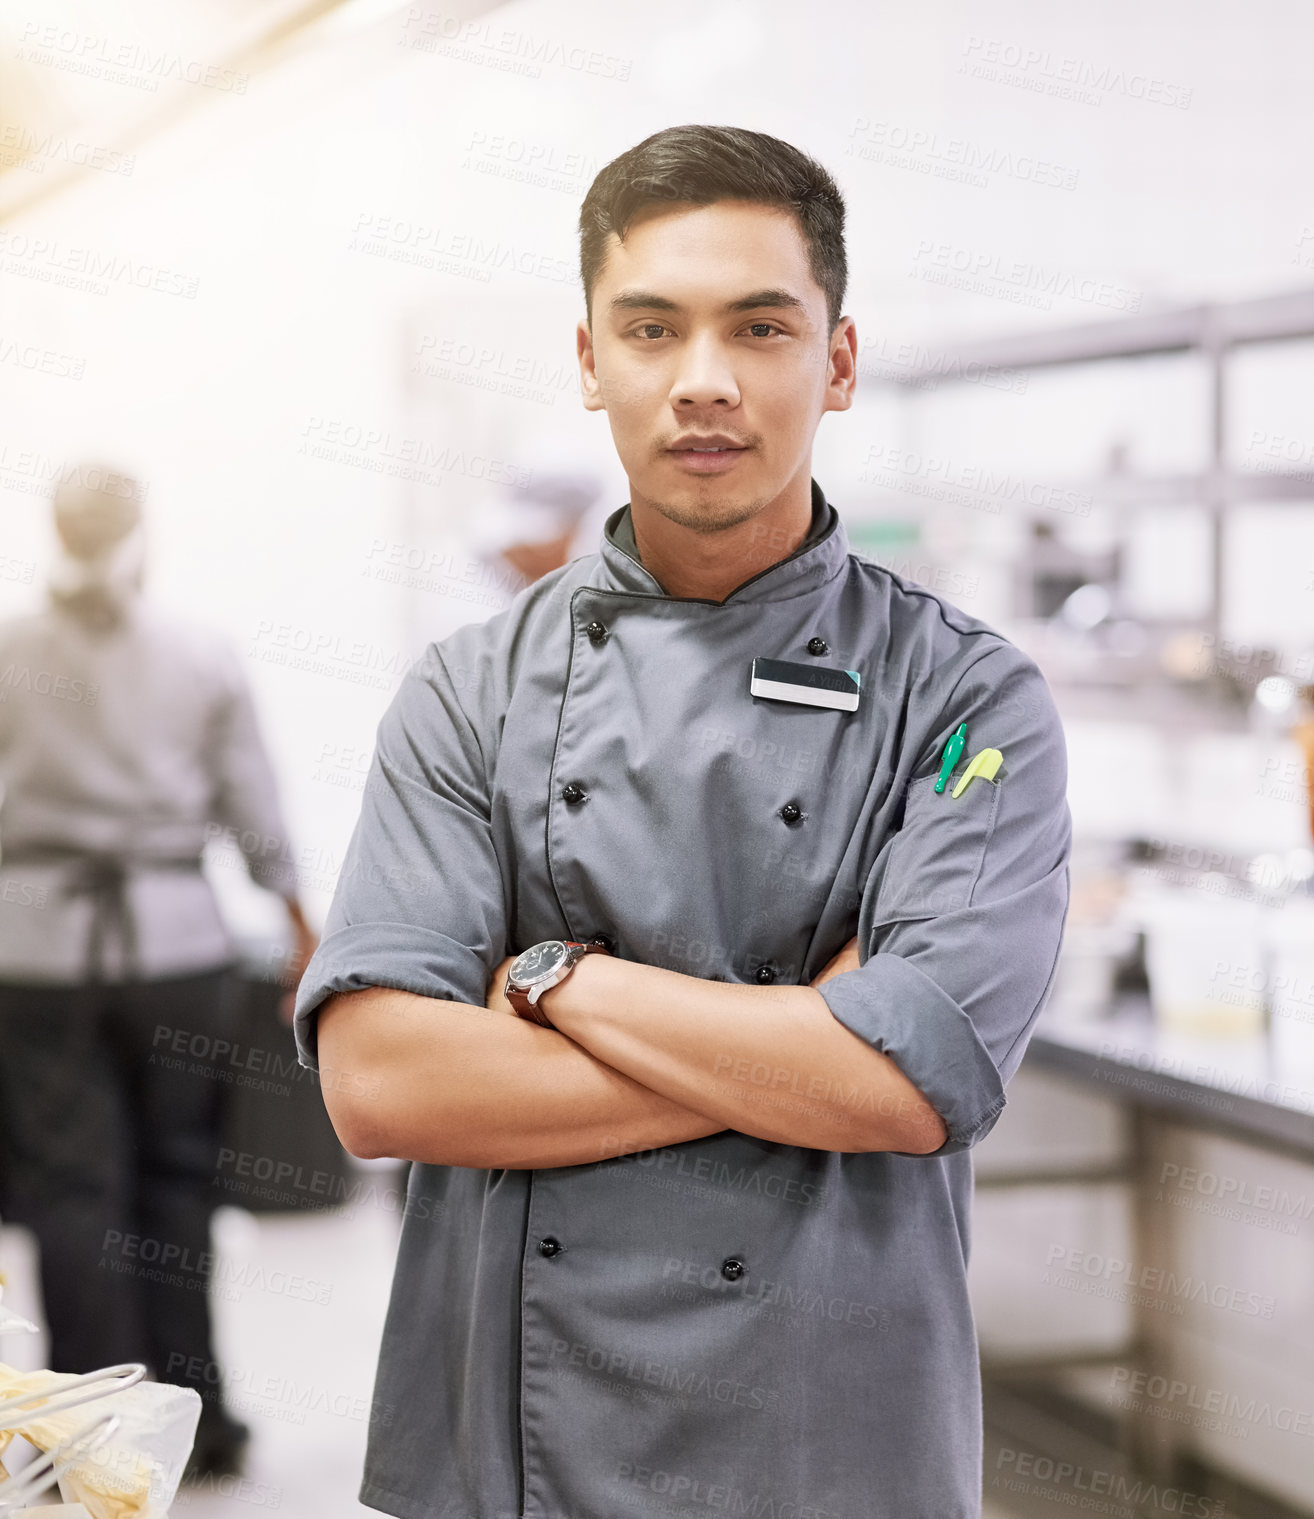 Buy stock photo Cropped portrait of a young male chef standing with his arms folded in the kitchen